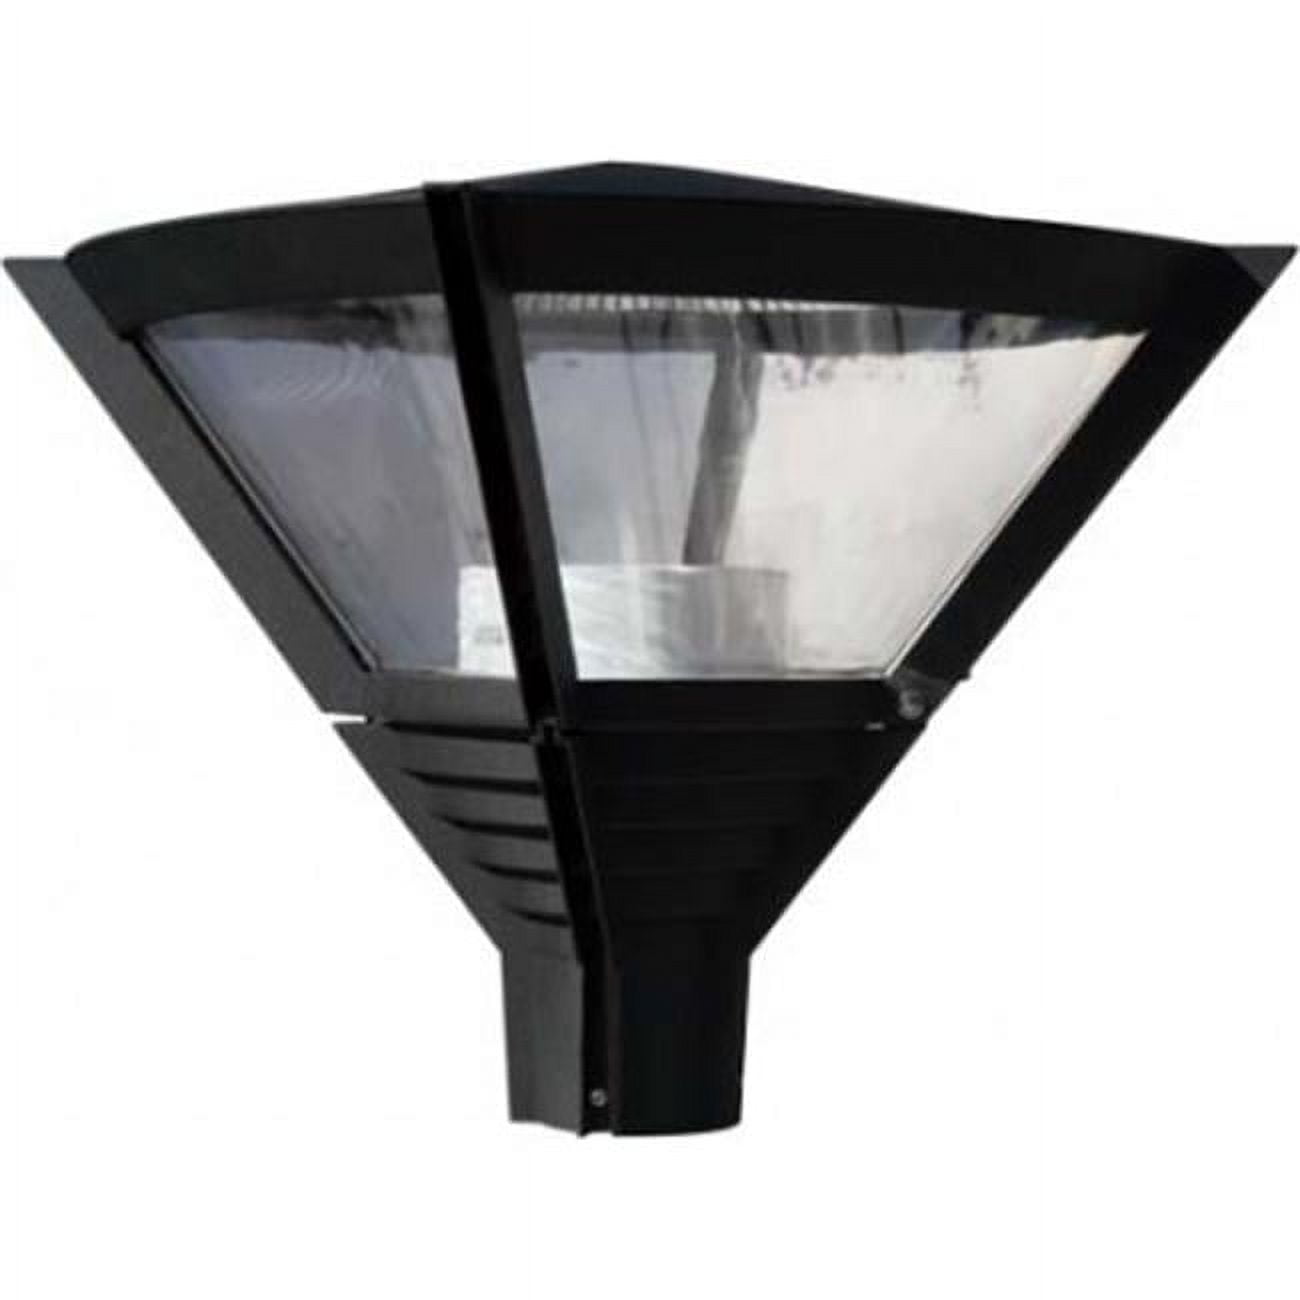 Picture of Dabmar Lighting GM562-B Powder Coated Cast Aluminum Architectural Post Top Light Fixture, Black - 20.75 x 20.75 x 20.75 in.